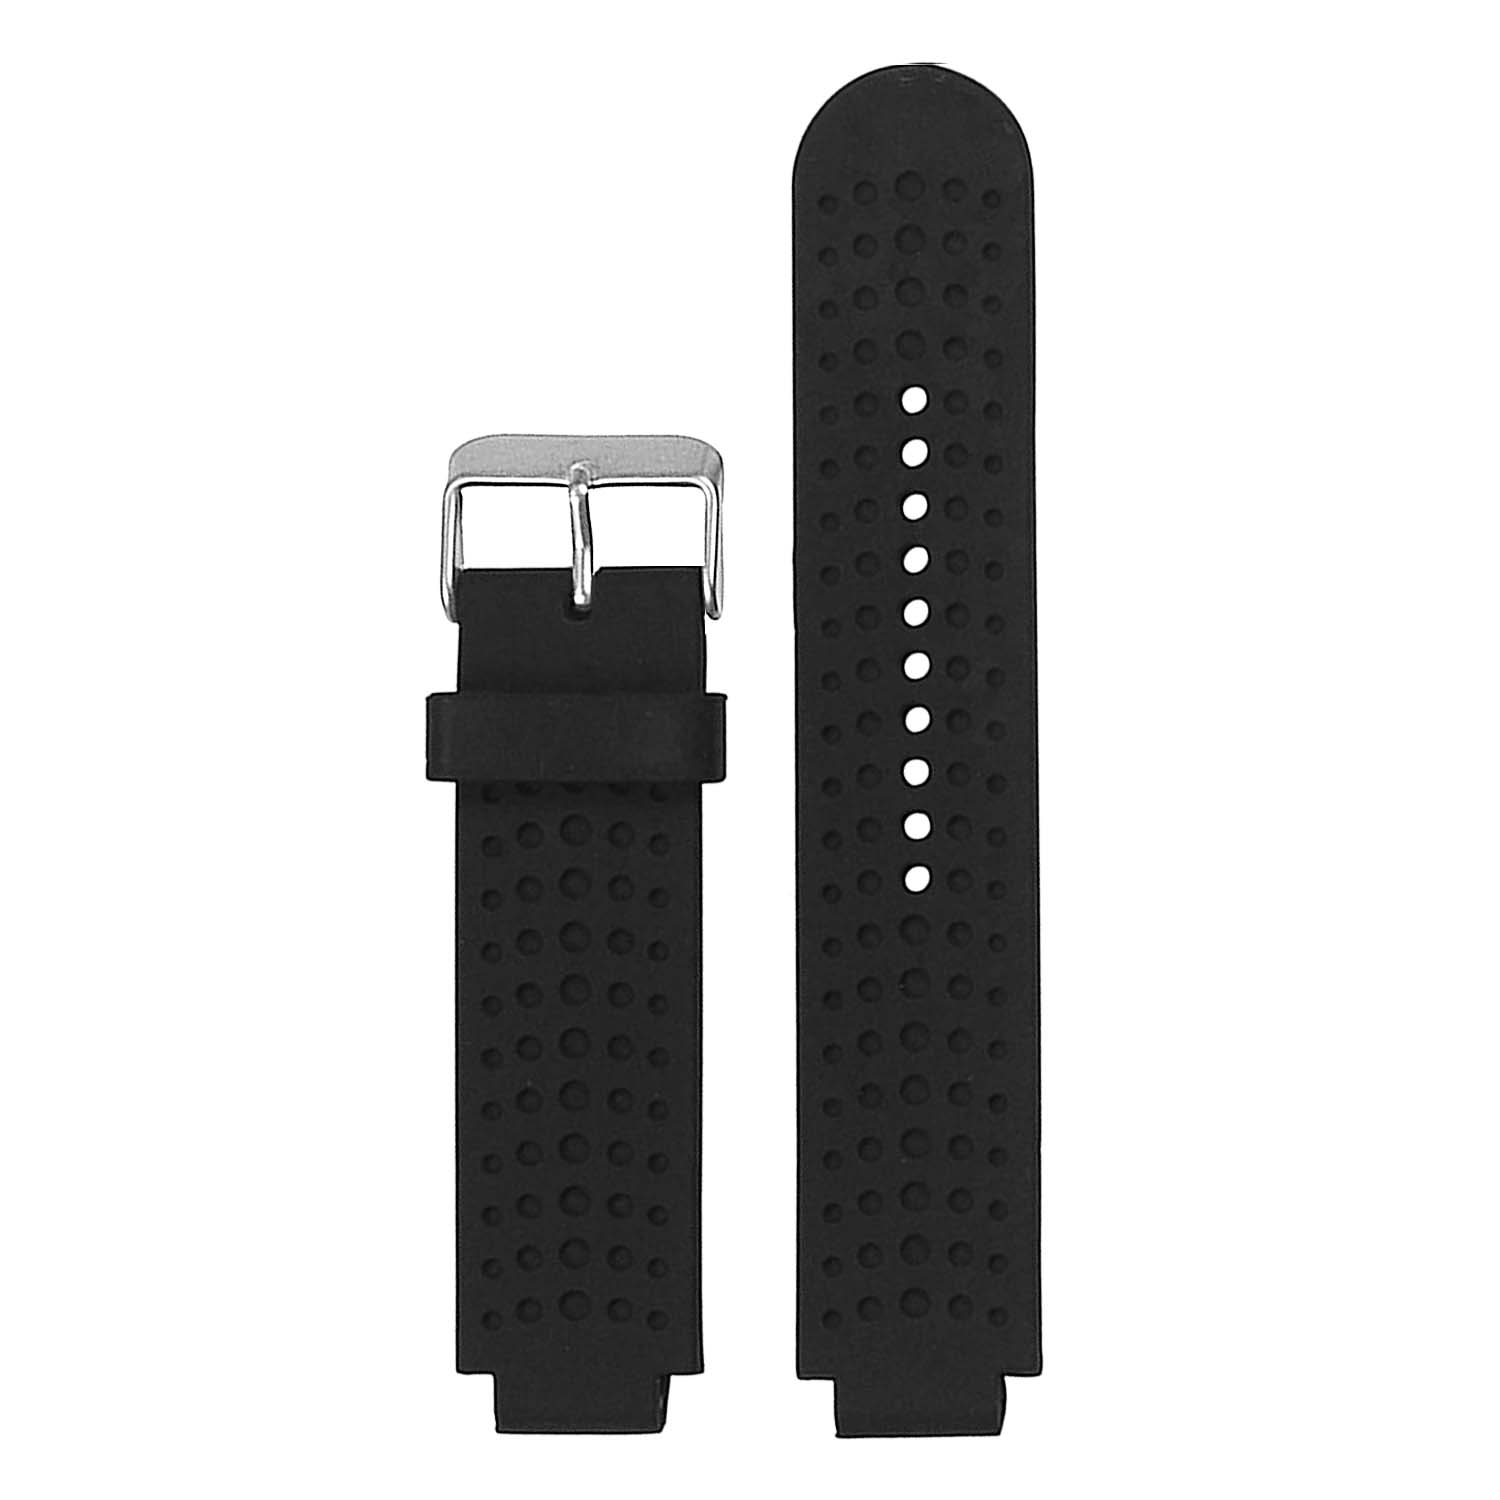 Silicone Rally Strap for Garmin Forerunner 220 / 230 / 235 / 260 / 735XT /  Approach S5 / S6 / S20